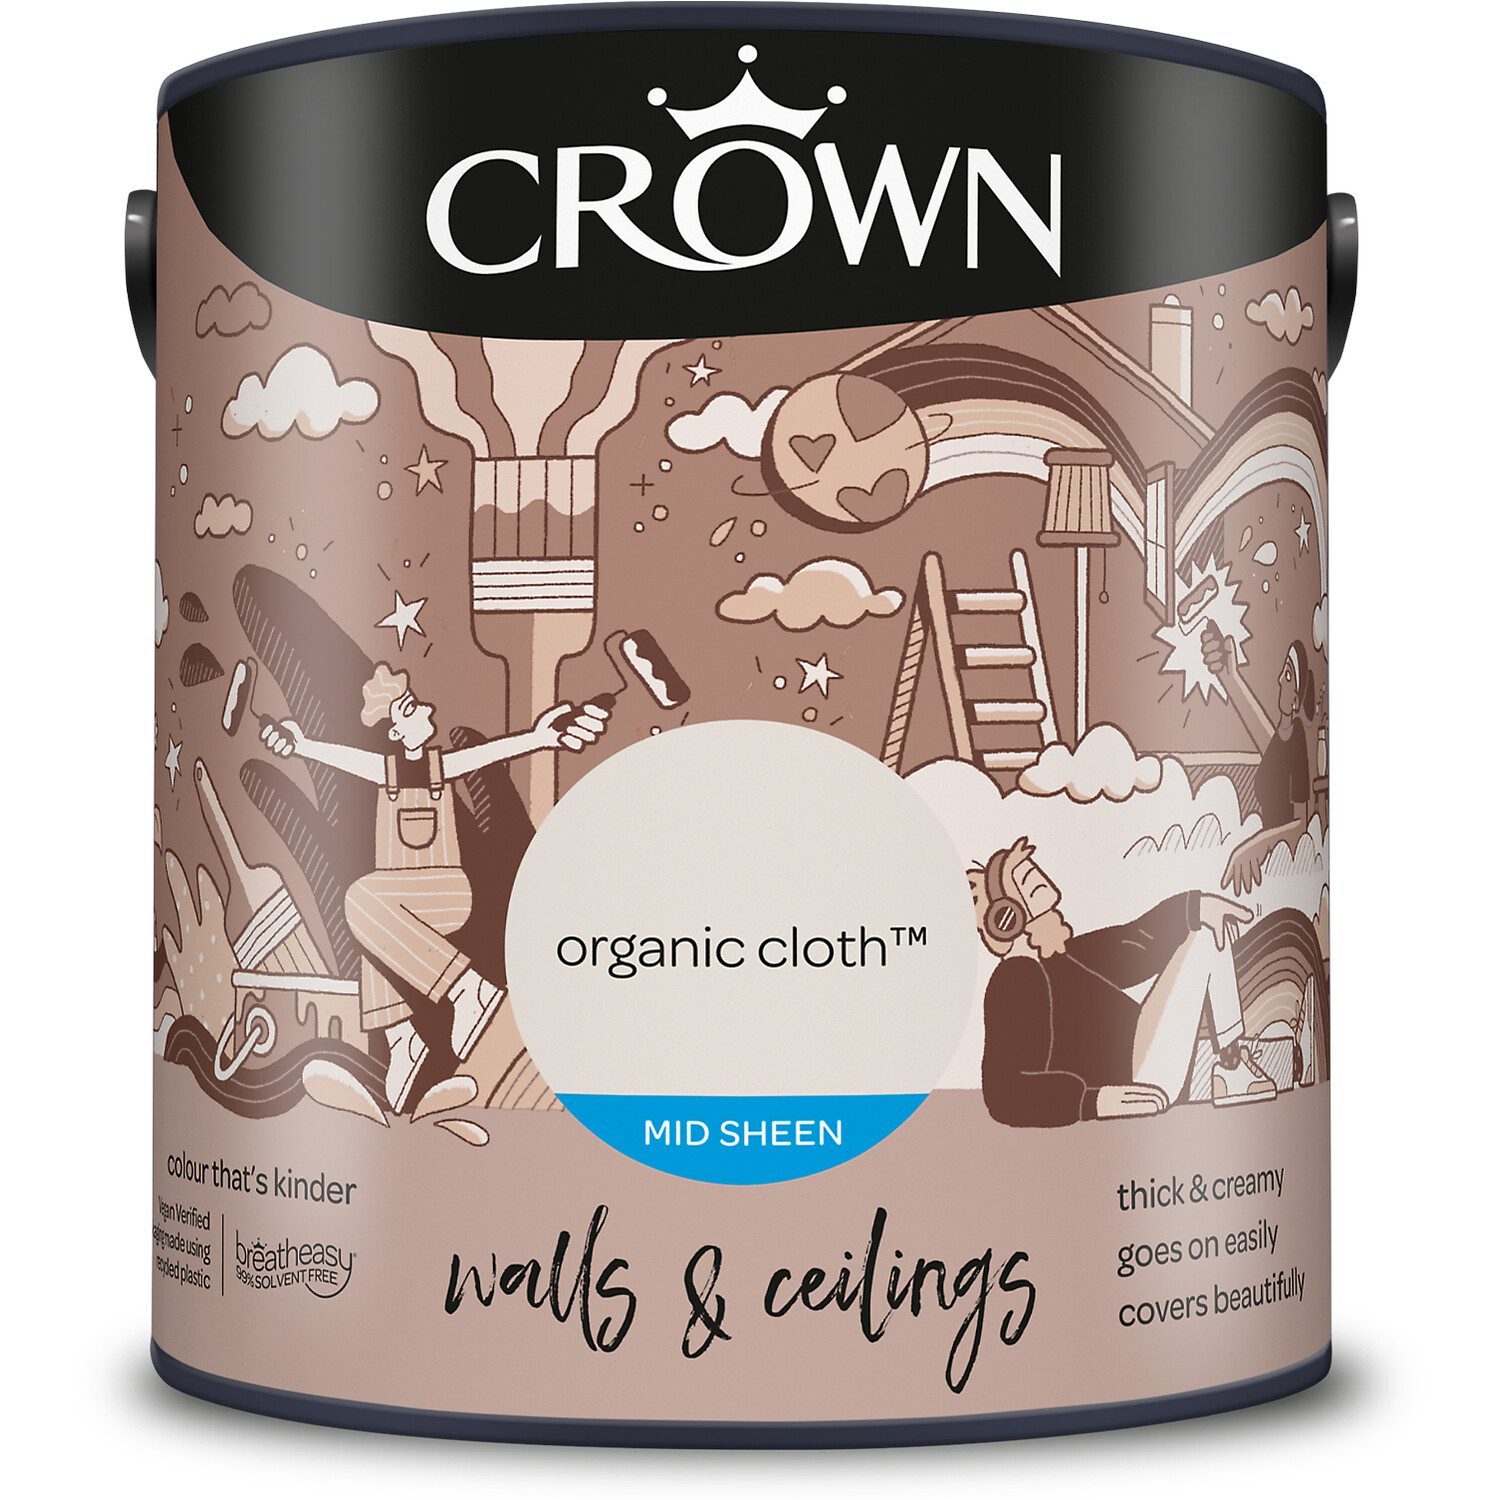 Crown Walls & Ceilings Organic Cloth Mid Sheen Emulsion Paint 2.5L Image 2